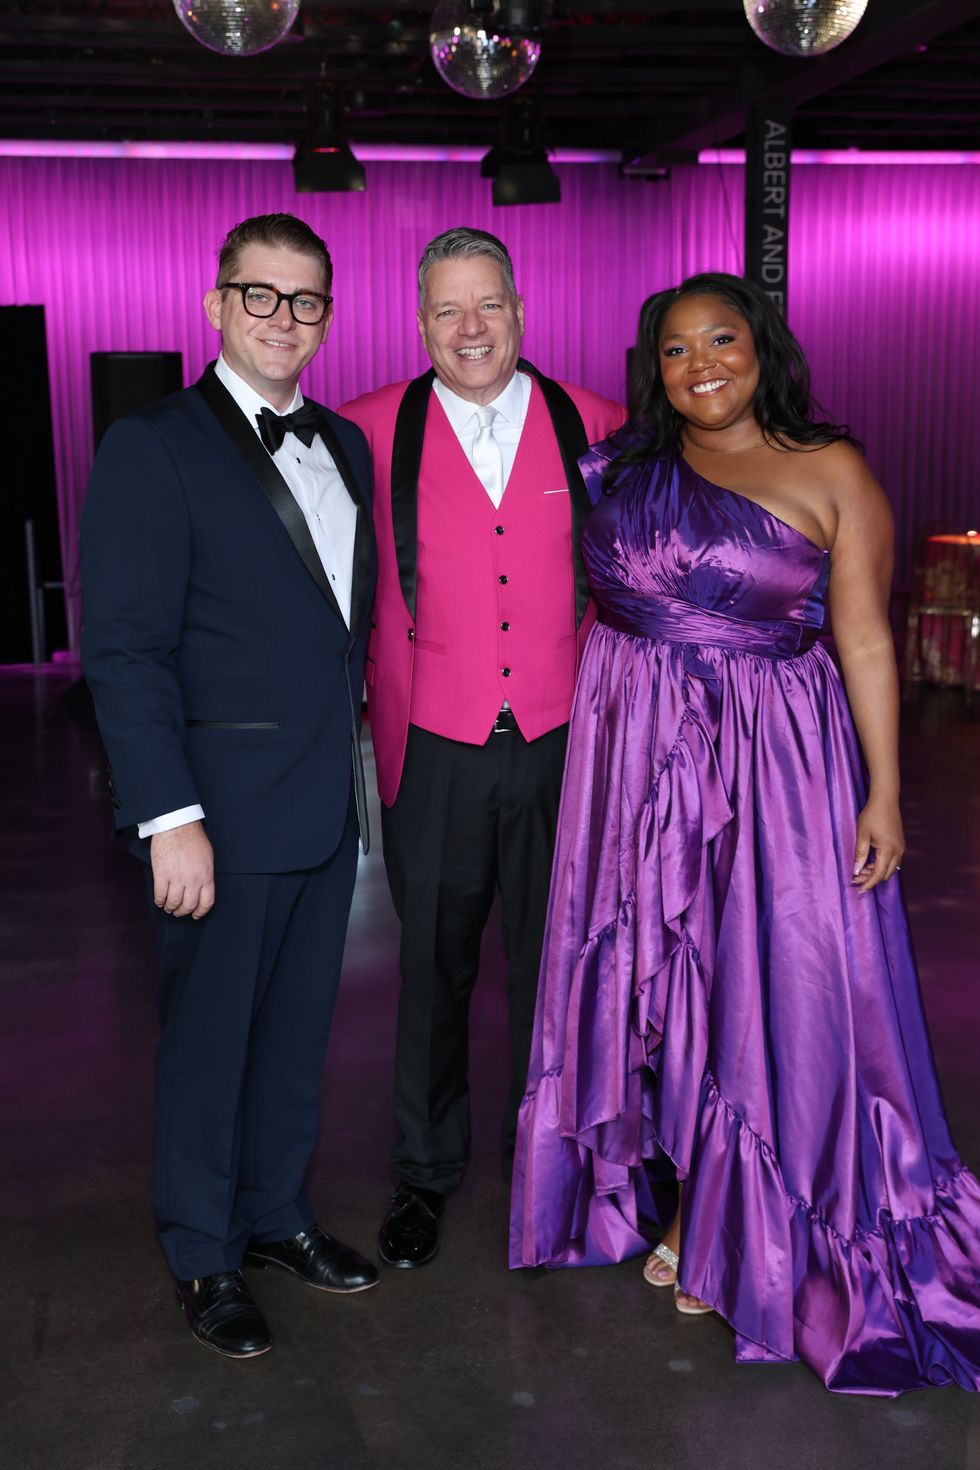 Associate Artistic Director Mitchell Greco, Kenn McLaughlin, and Associate Artistic Director Eboni Bell Darcy